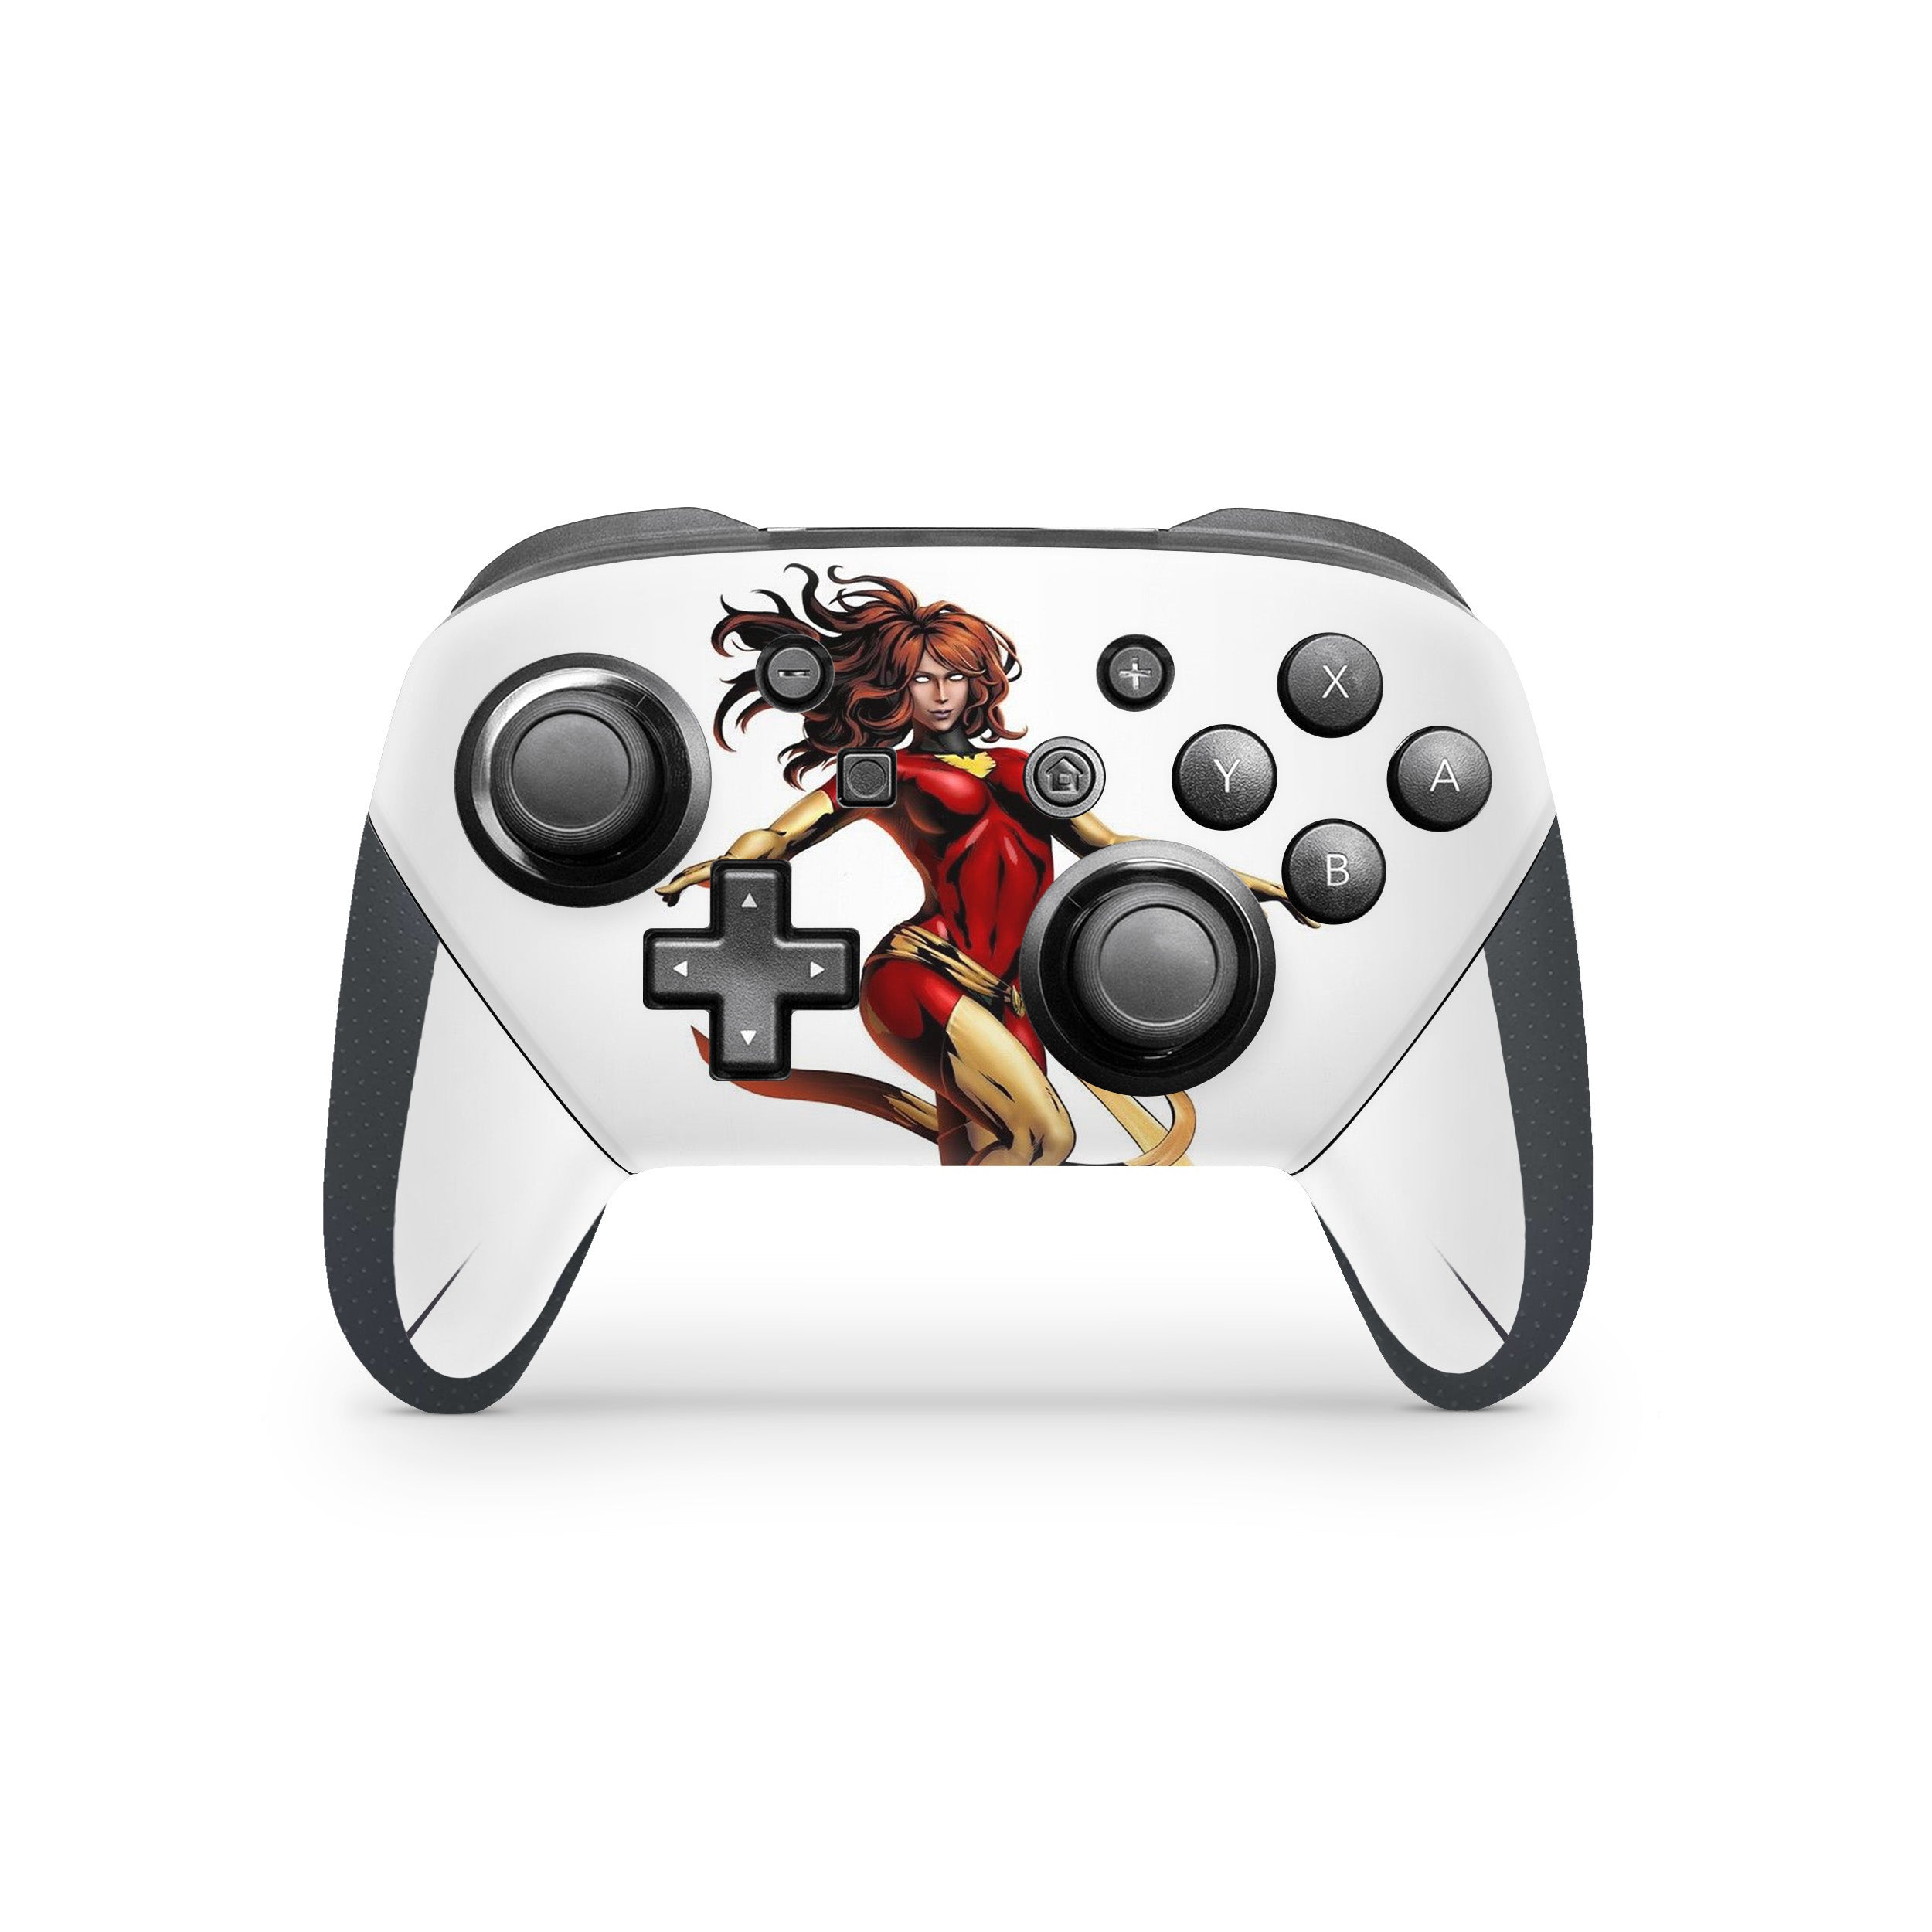 A video game skin featuring a Marvel X Men Phoenix design for the Switch Pro Controller.